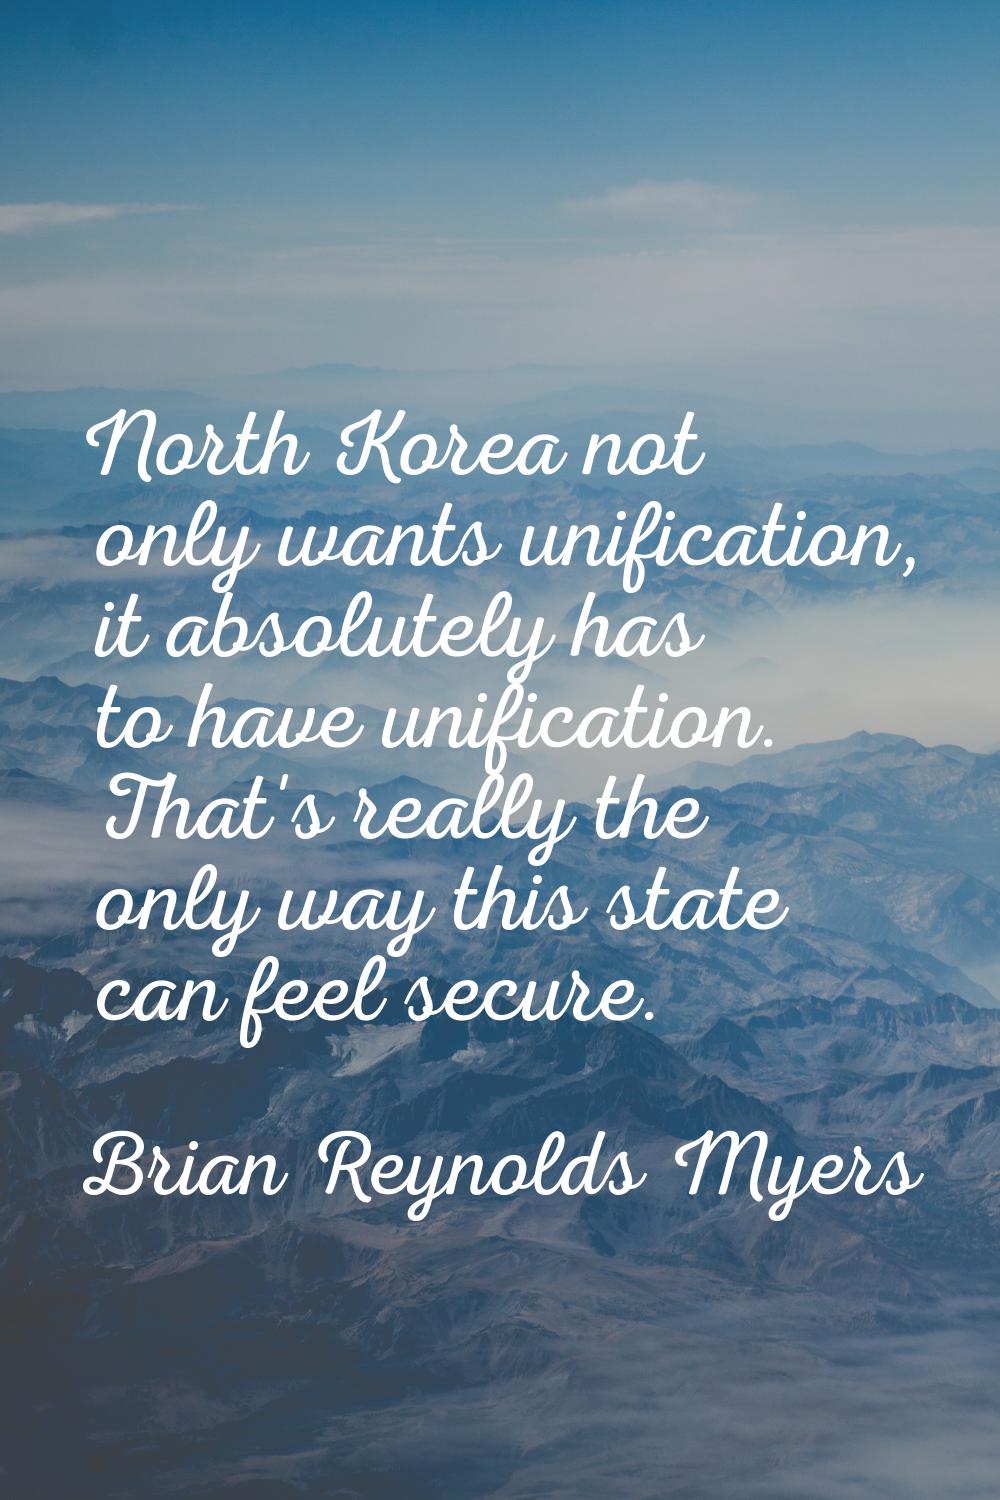 North Korea not only wants unification, it absolutely has to have unification. That's really the on